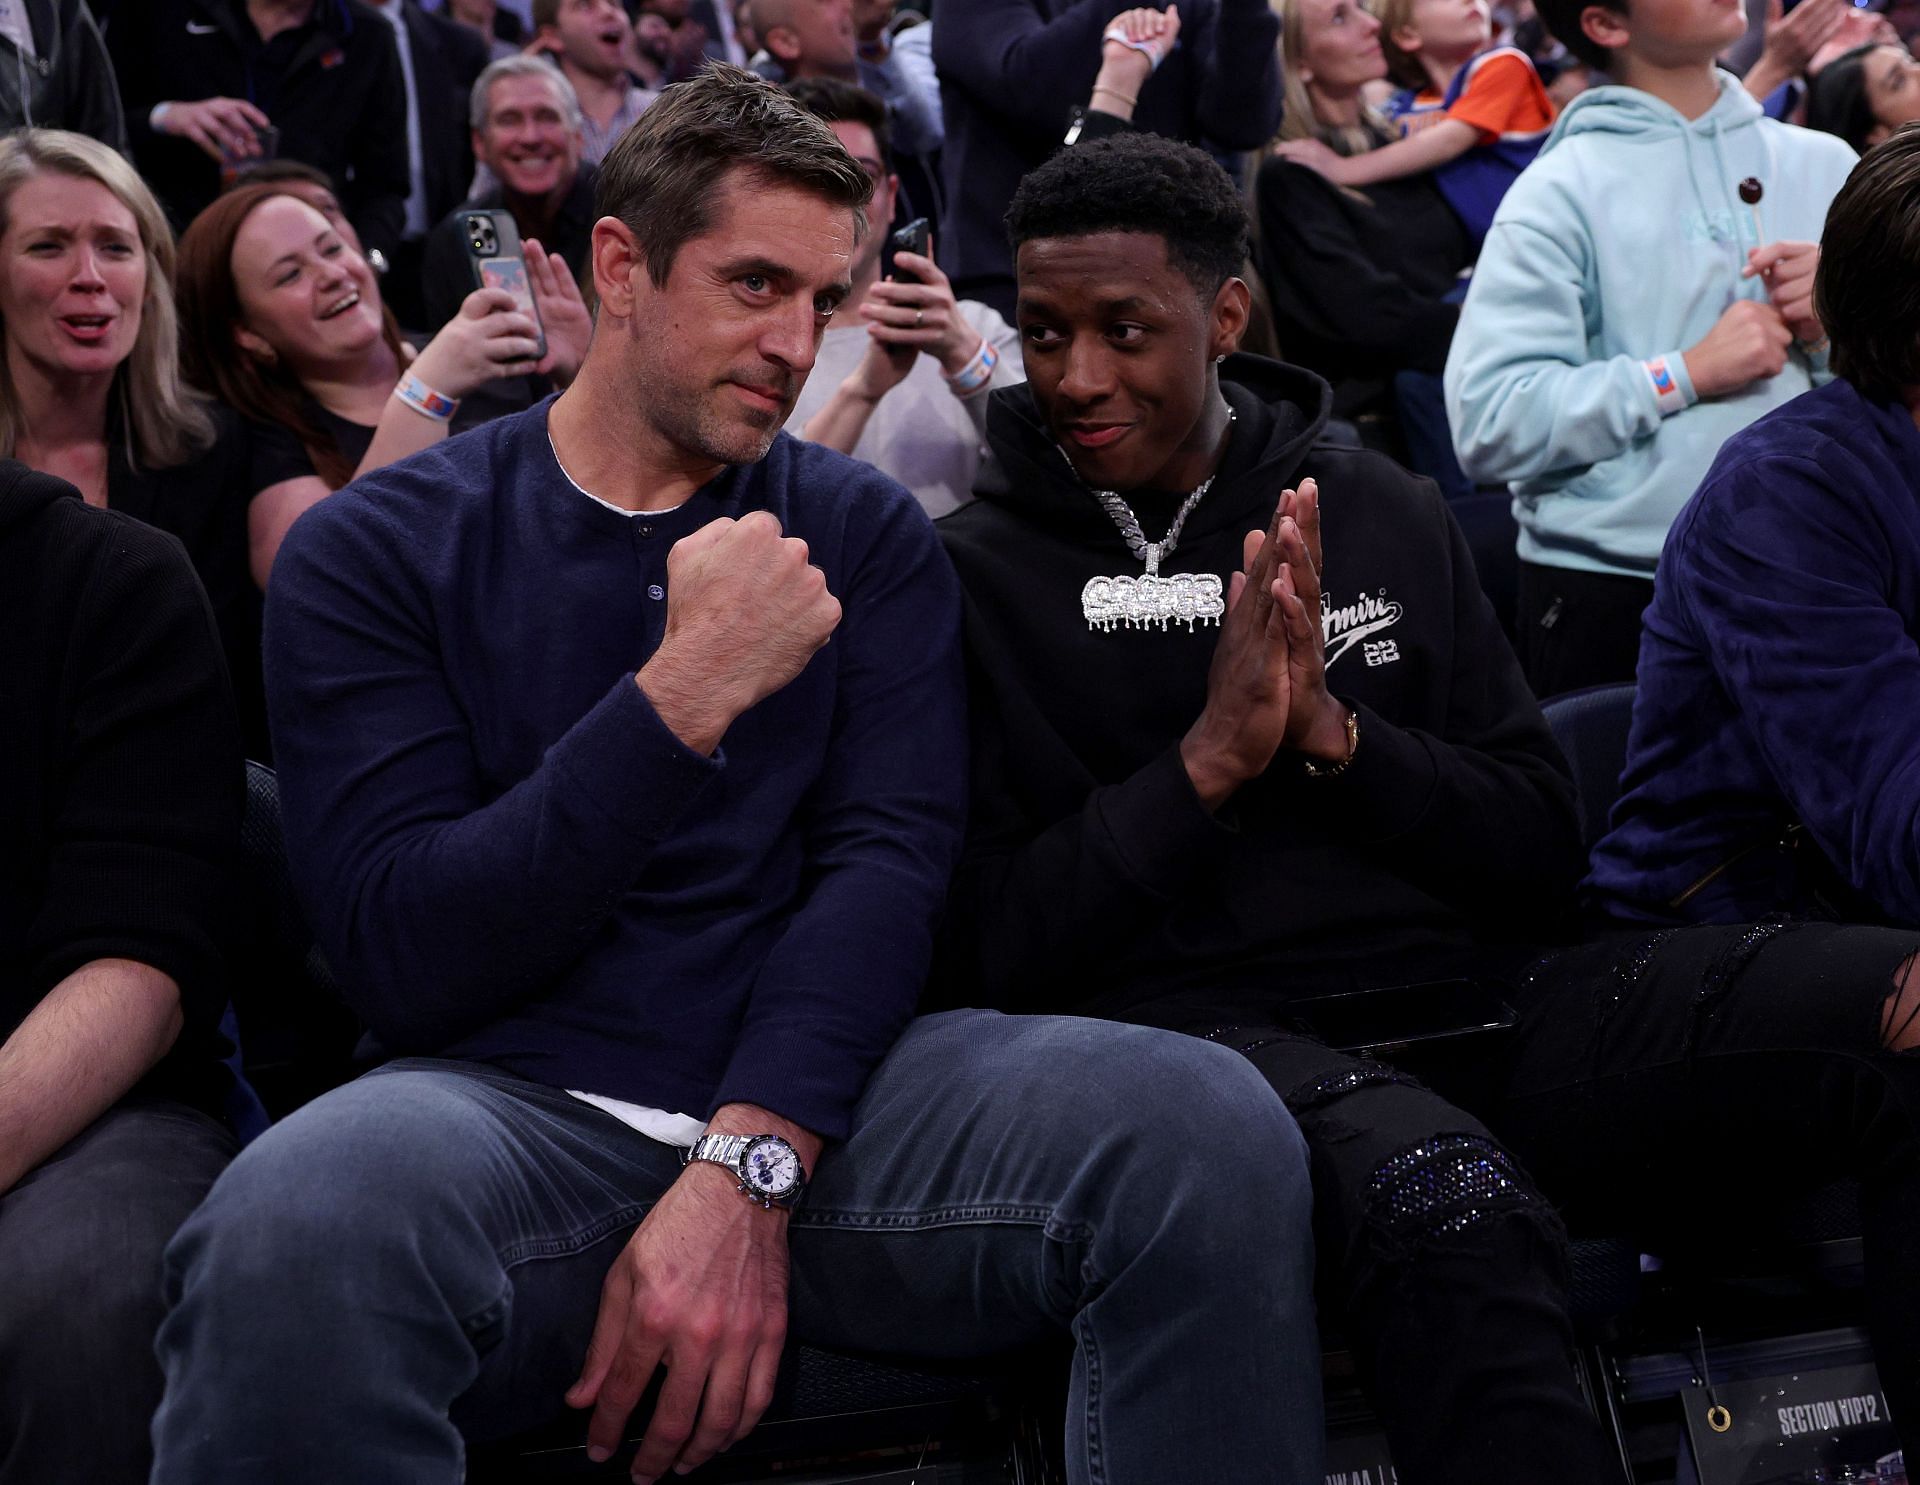 Rodgers and Sauce watching the Knicks playoff game in Madison Square Garden